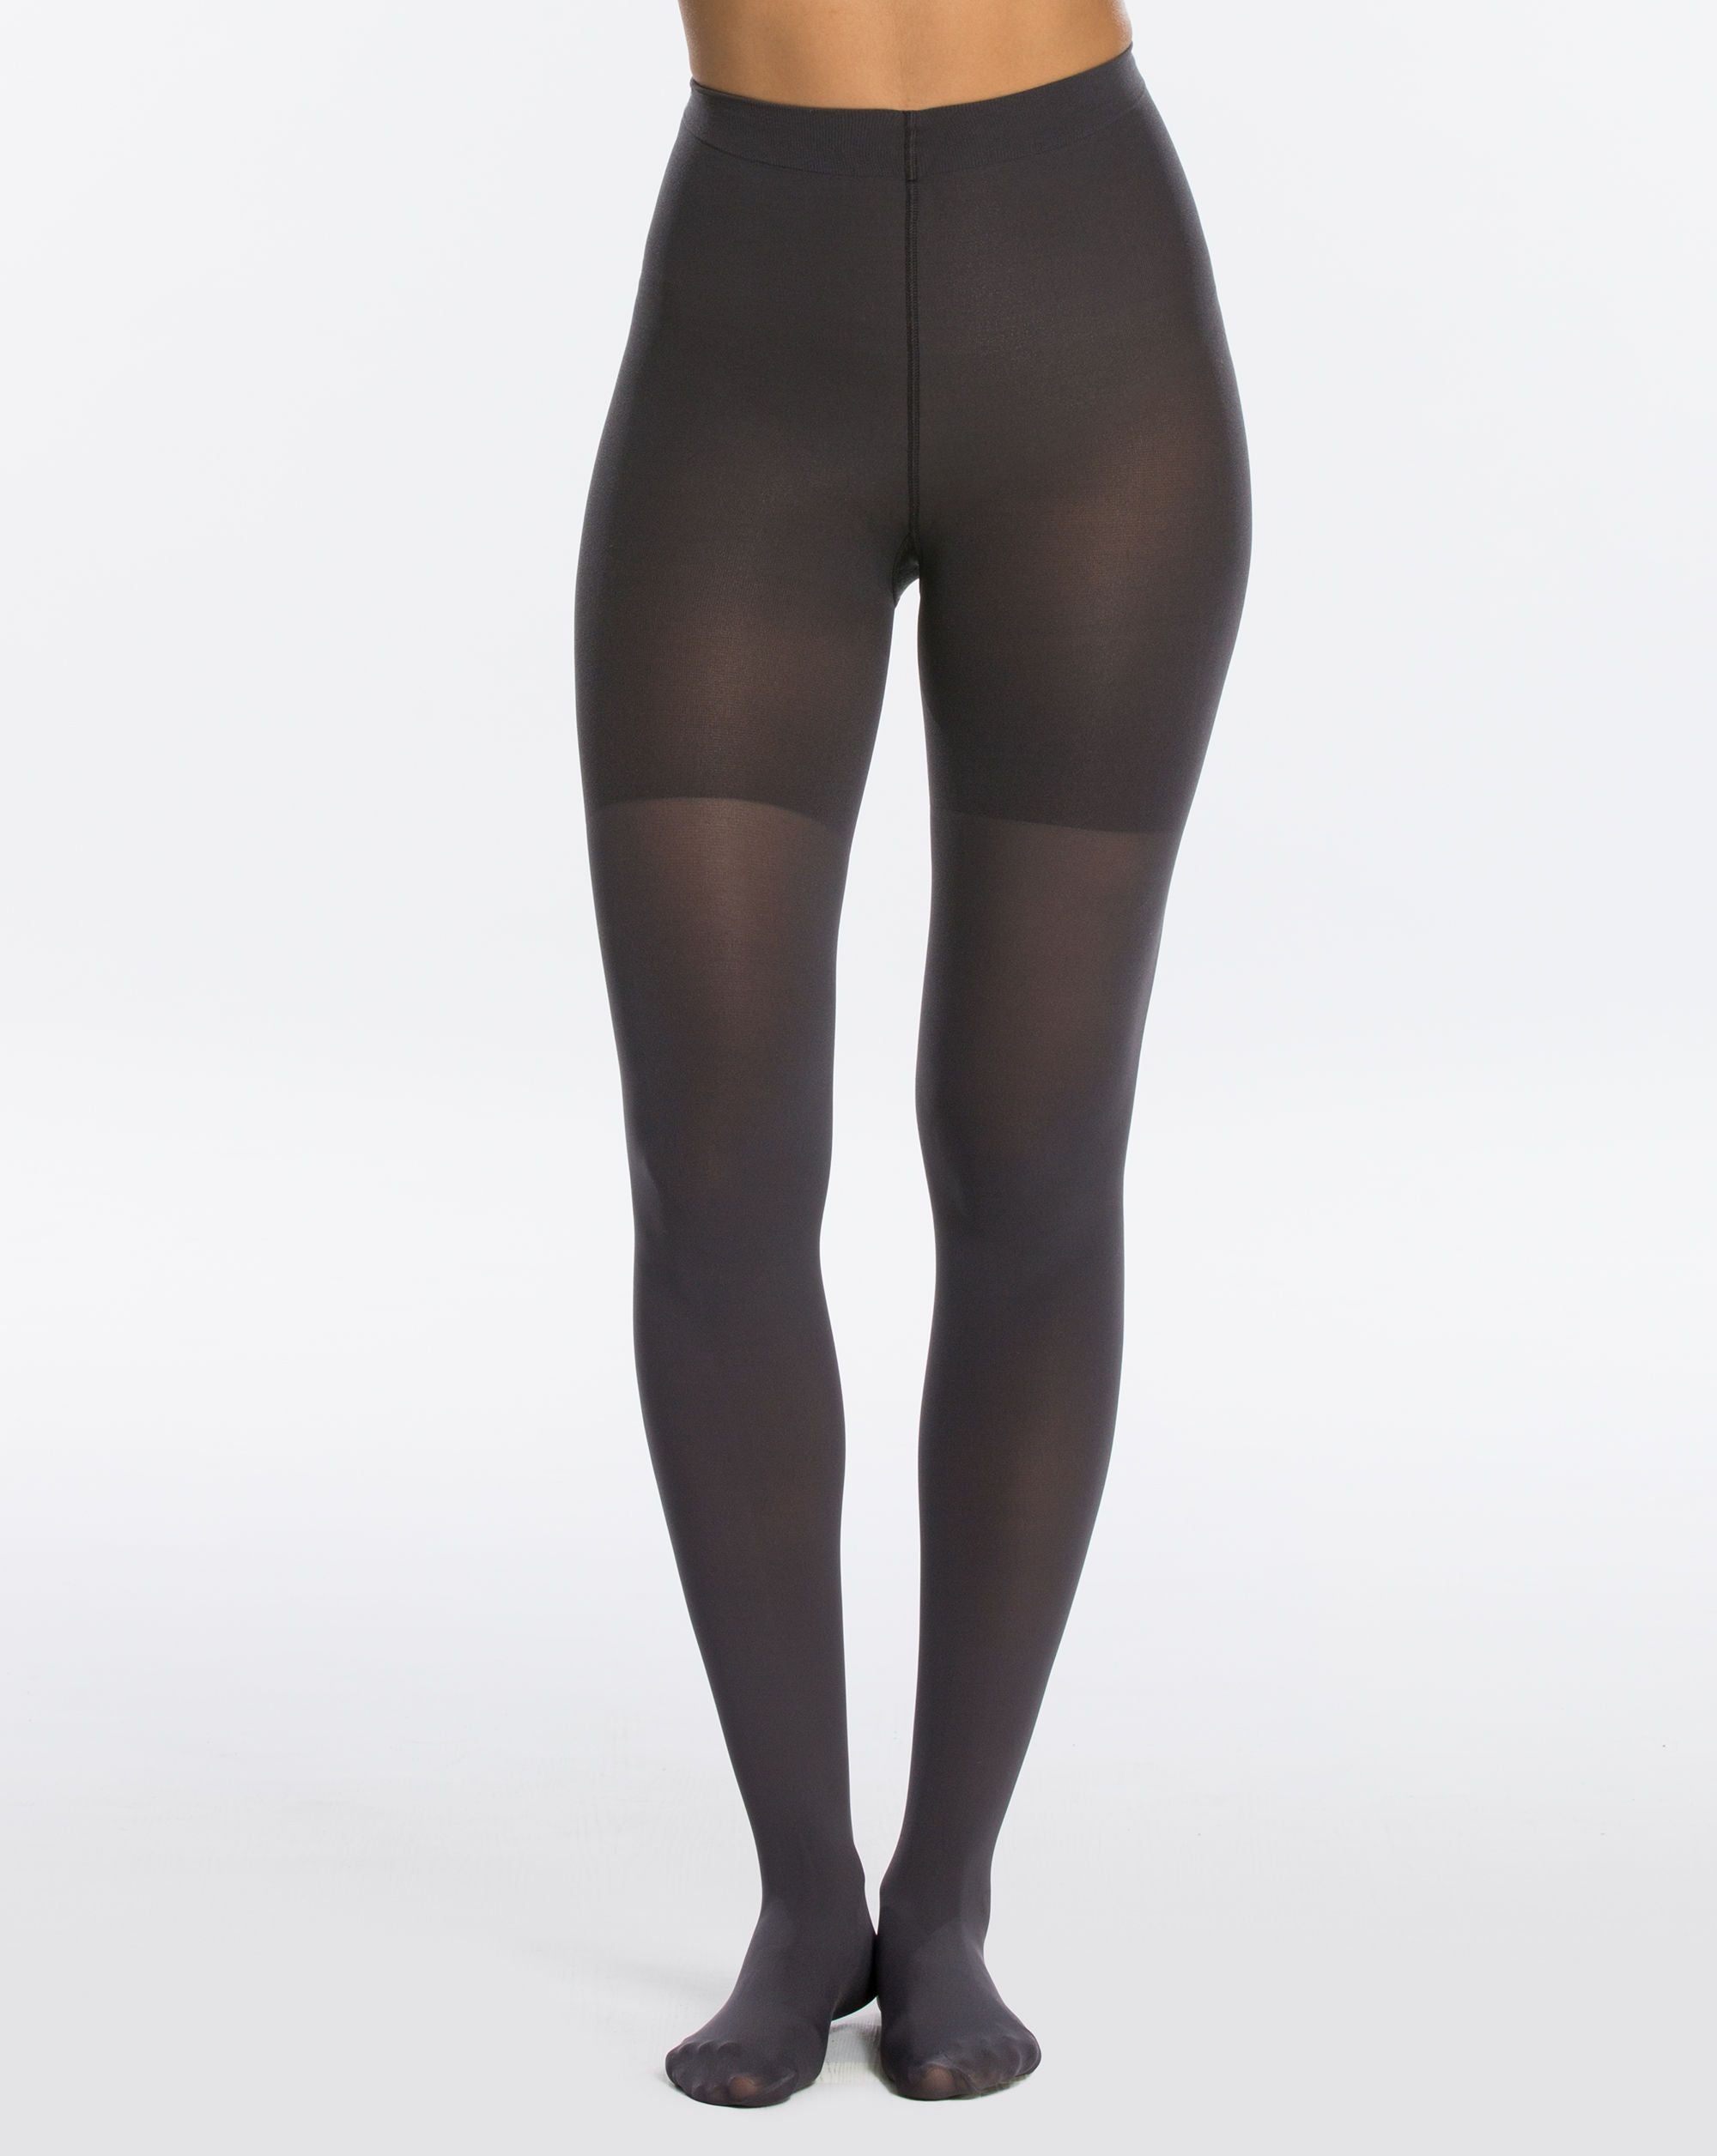 Spanx Luxe Leg Tights Black/A